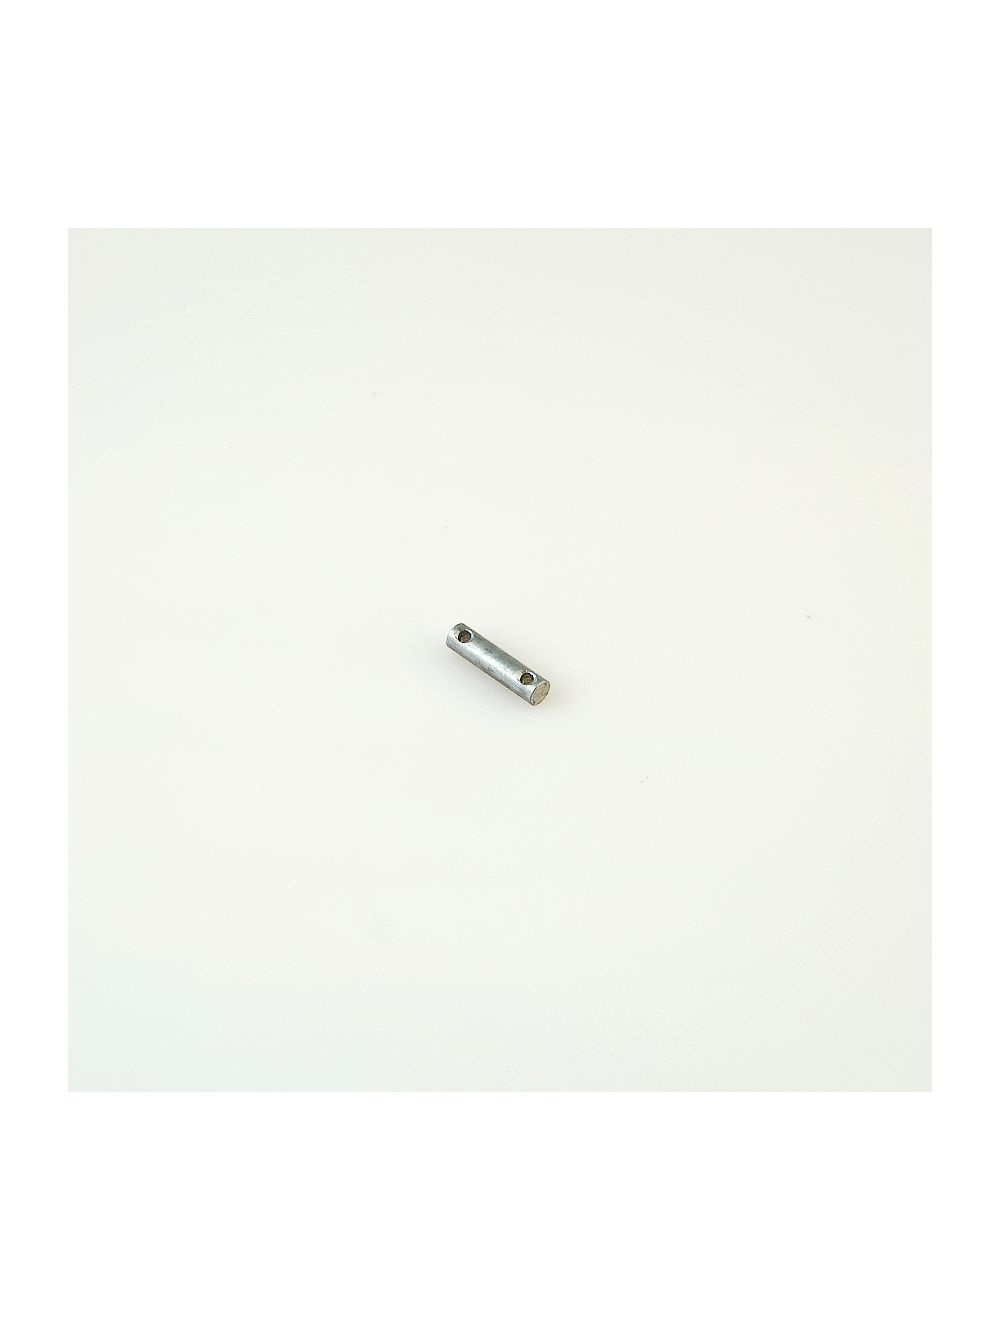 Spring Retaining Pin for TP 6881